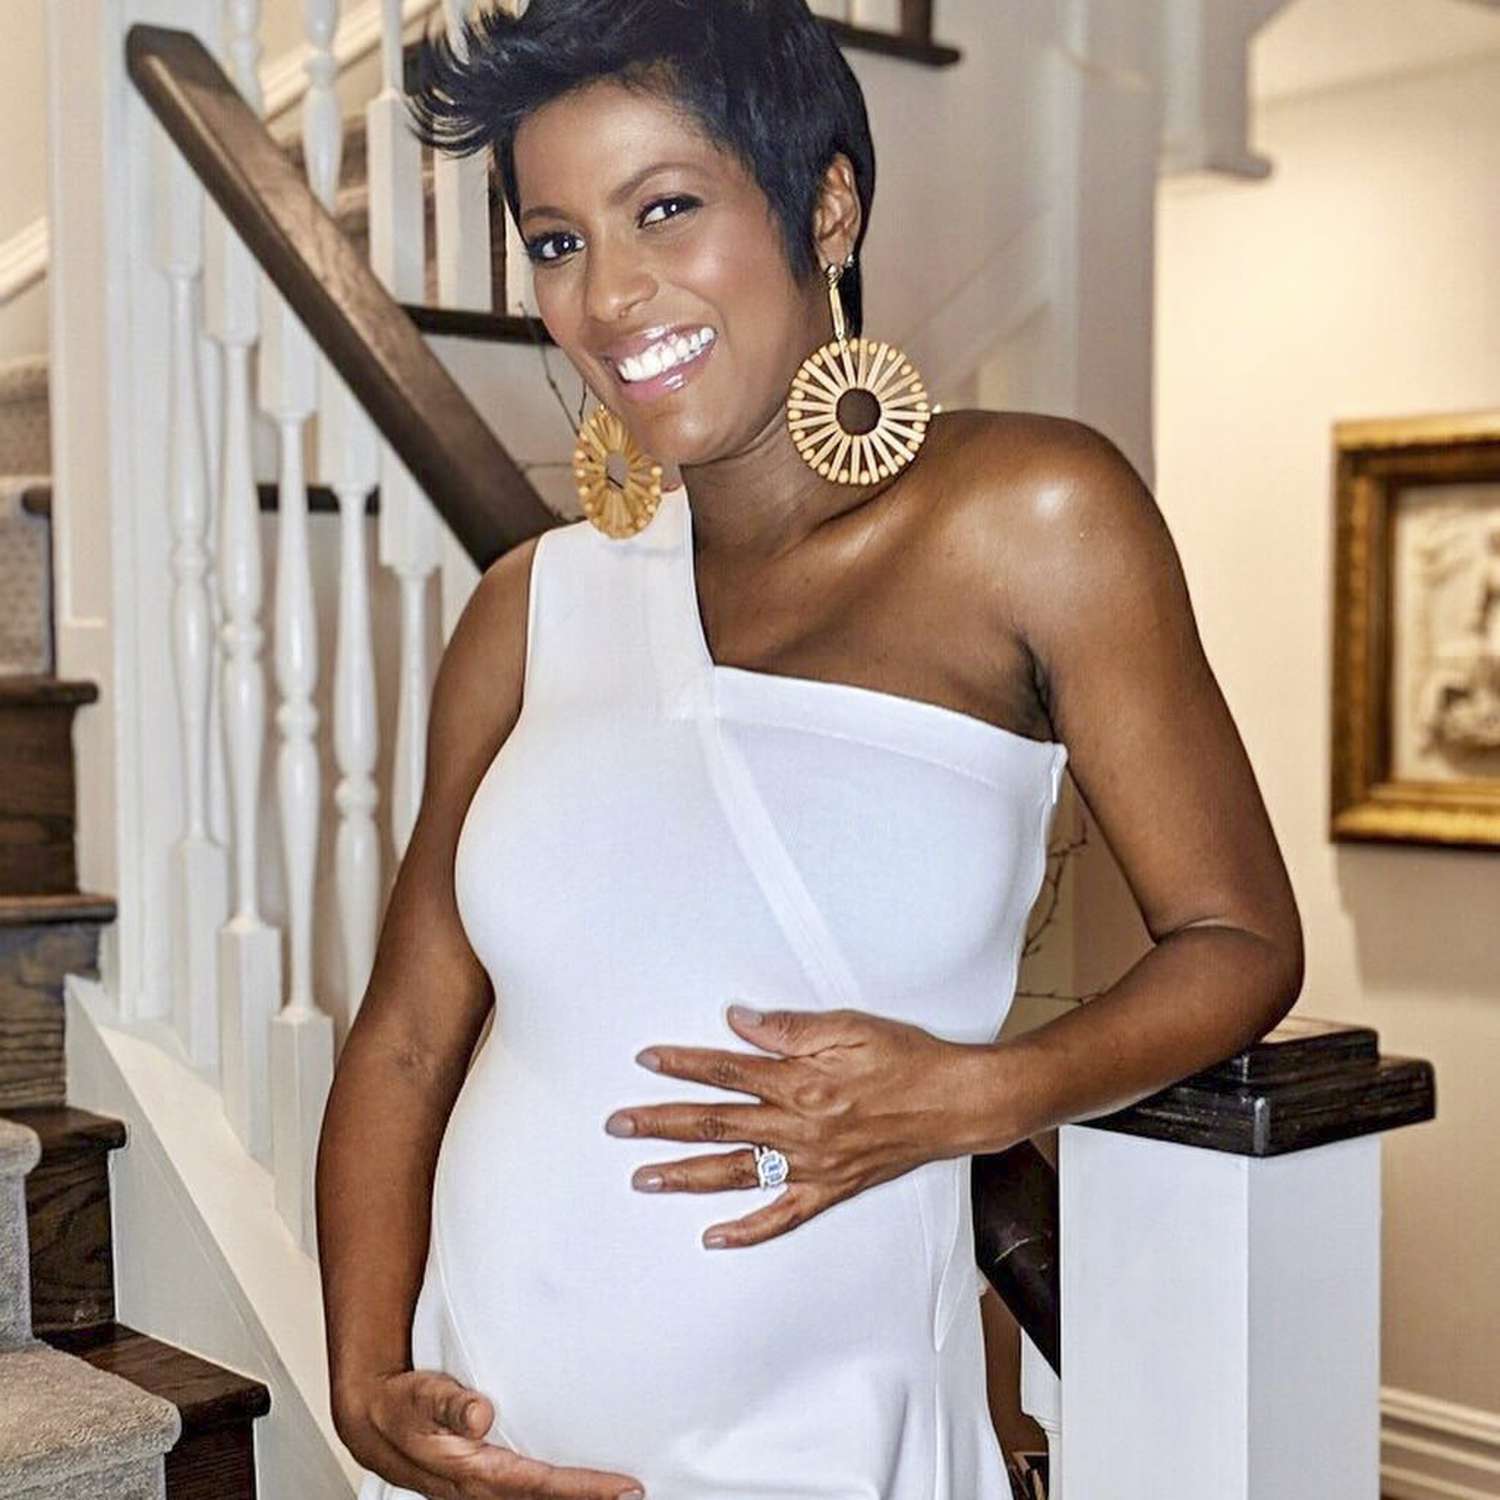 abeni celeste flowers recommends pics of tamron hall pic